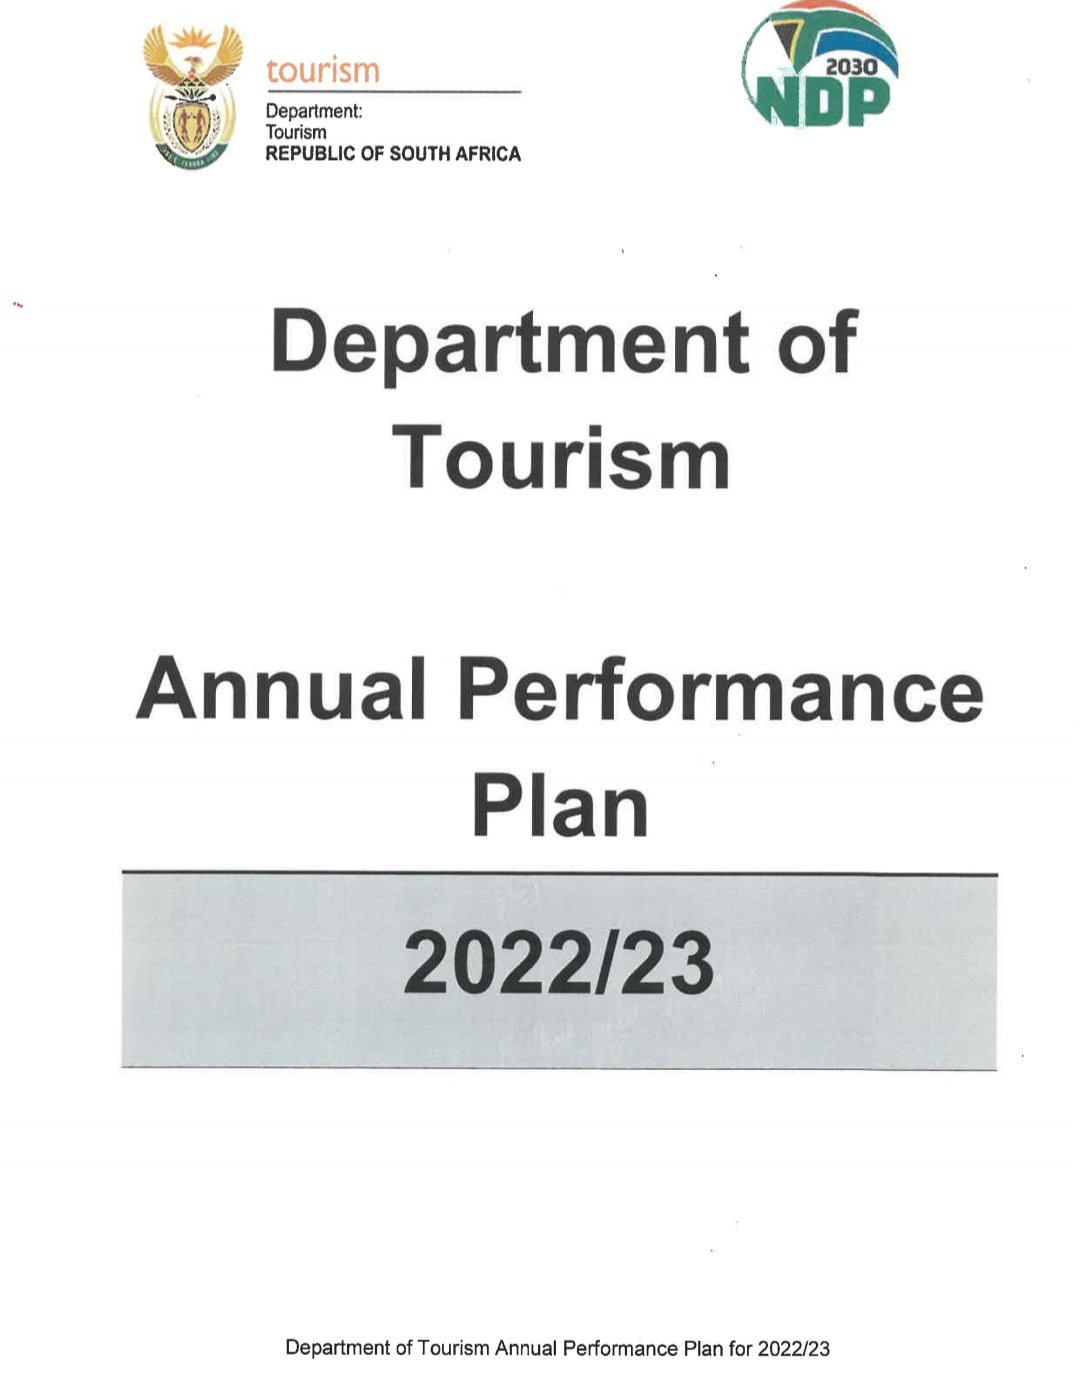 Department of Tourism Annual Performance Plan 2022-2023